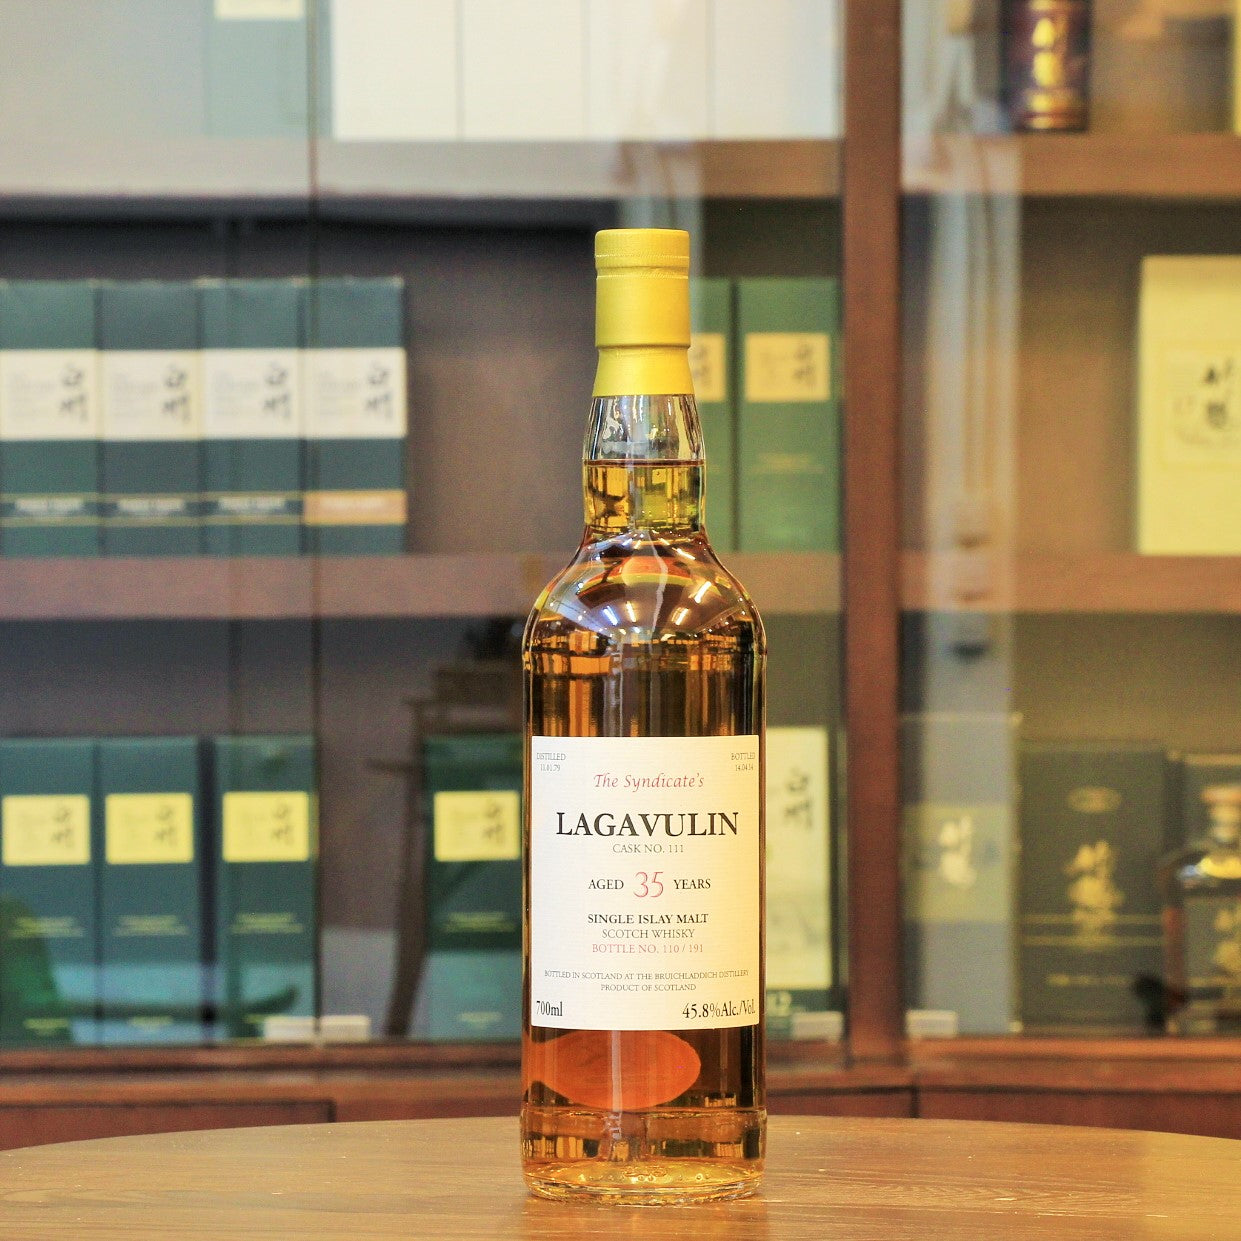 Region: Islay (Scotland)  Distillery: Lagavulin  Age: 35 Years  ABV: 45.8%  Size: 700ml  This Islay single malt from Lagavulin is a single cask#111 bottled by Murray MacDavid - one of most famouse independent bottler. Distilled in 1979 and bottled in 2014 for the Syndicated's series at the Bruchladdich distillery. Only 191 bottles released. The syndicated is a group of 10 people who are whisky aficionado in Islay, to choose exceptional casks.